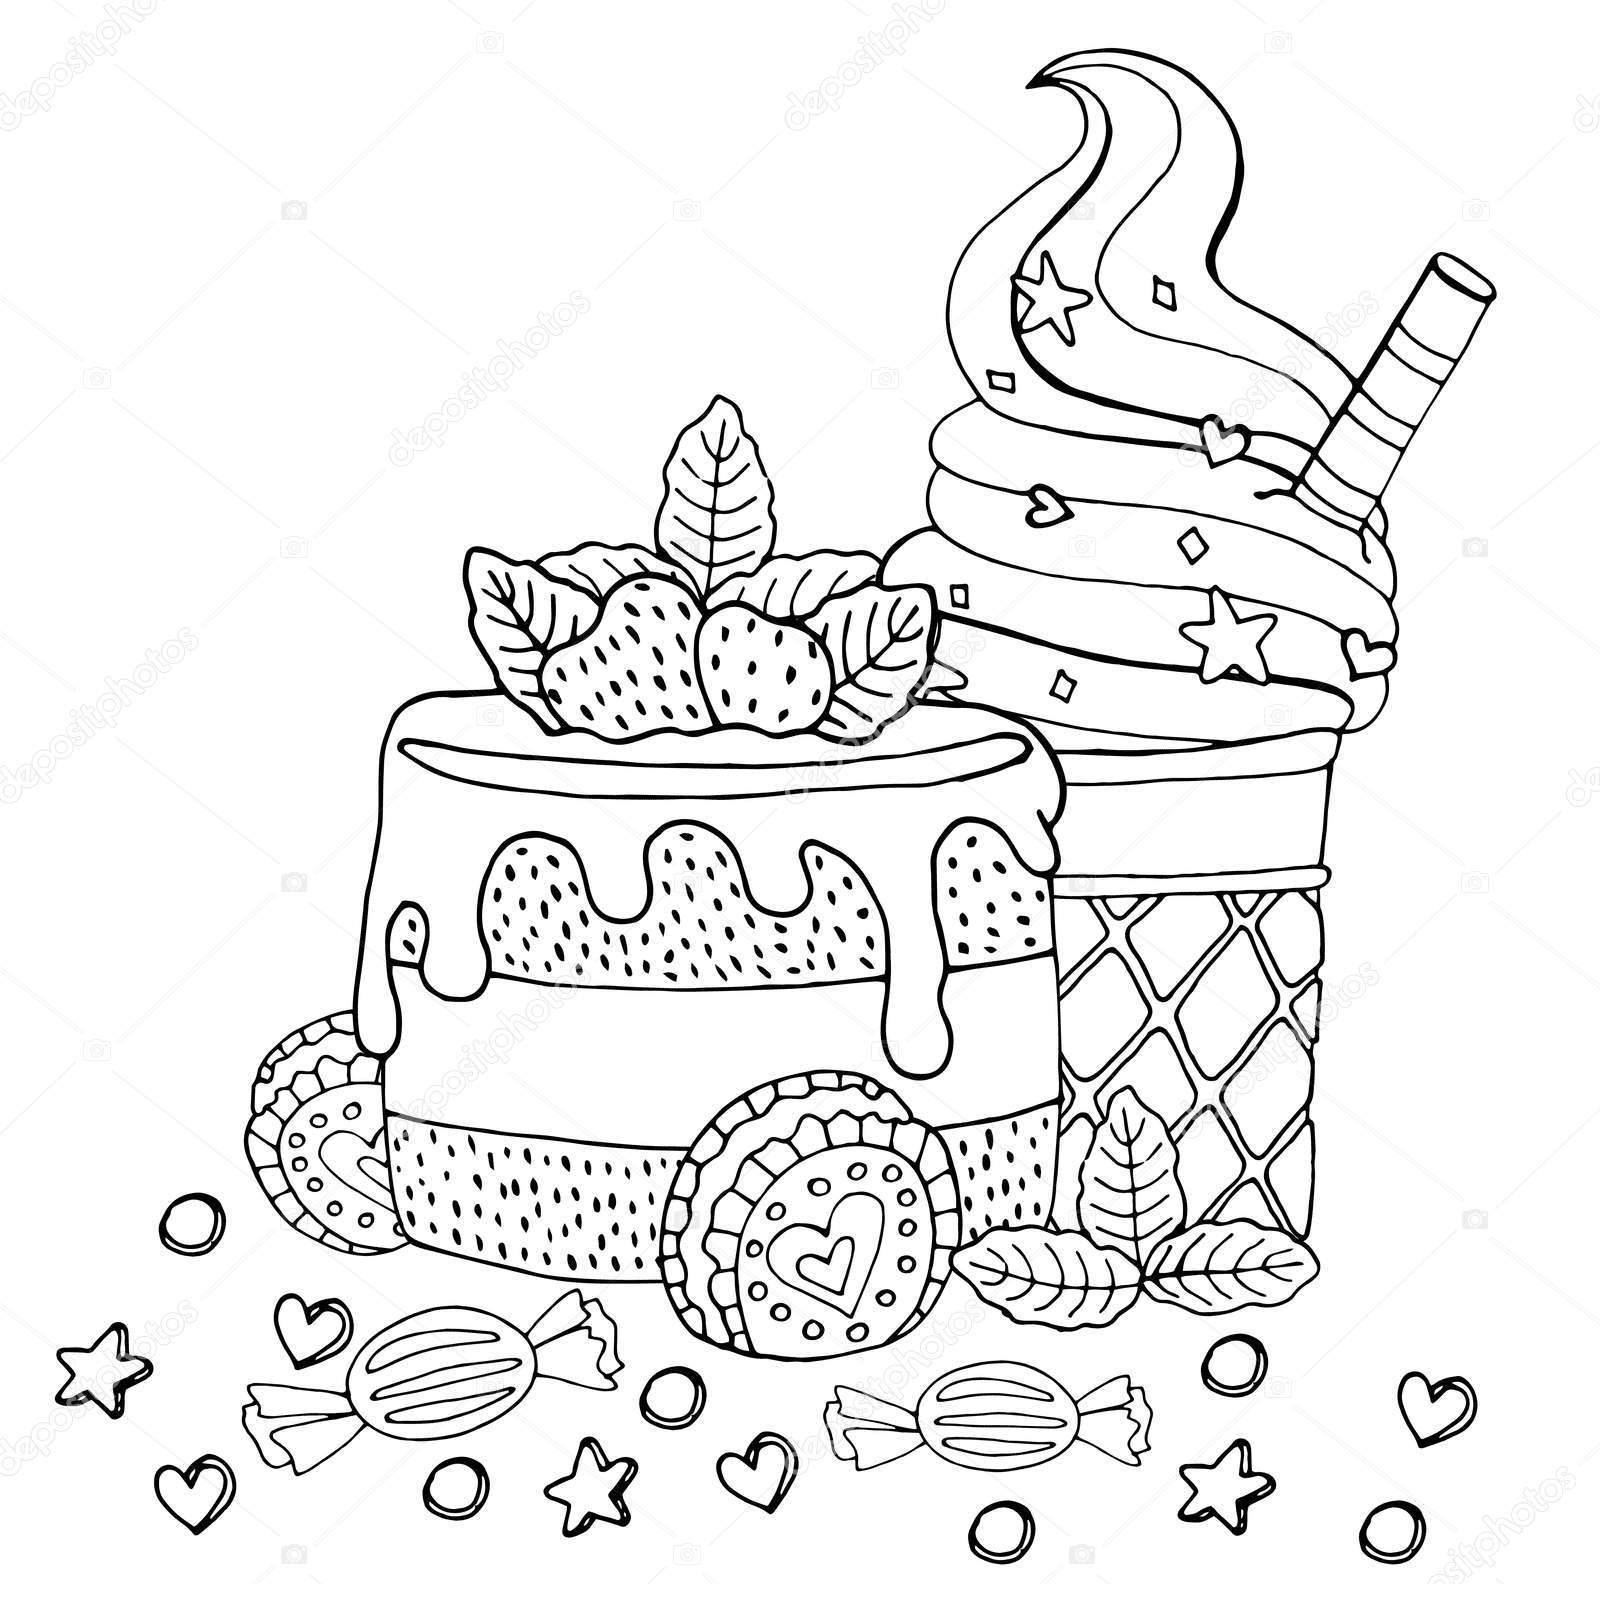 Cake with Cupcake, Candy and Ice cream Coloring Page